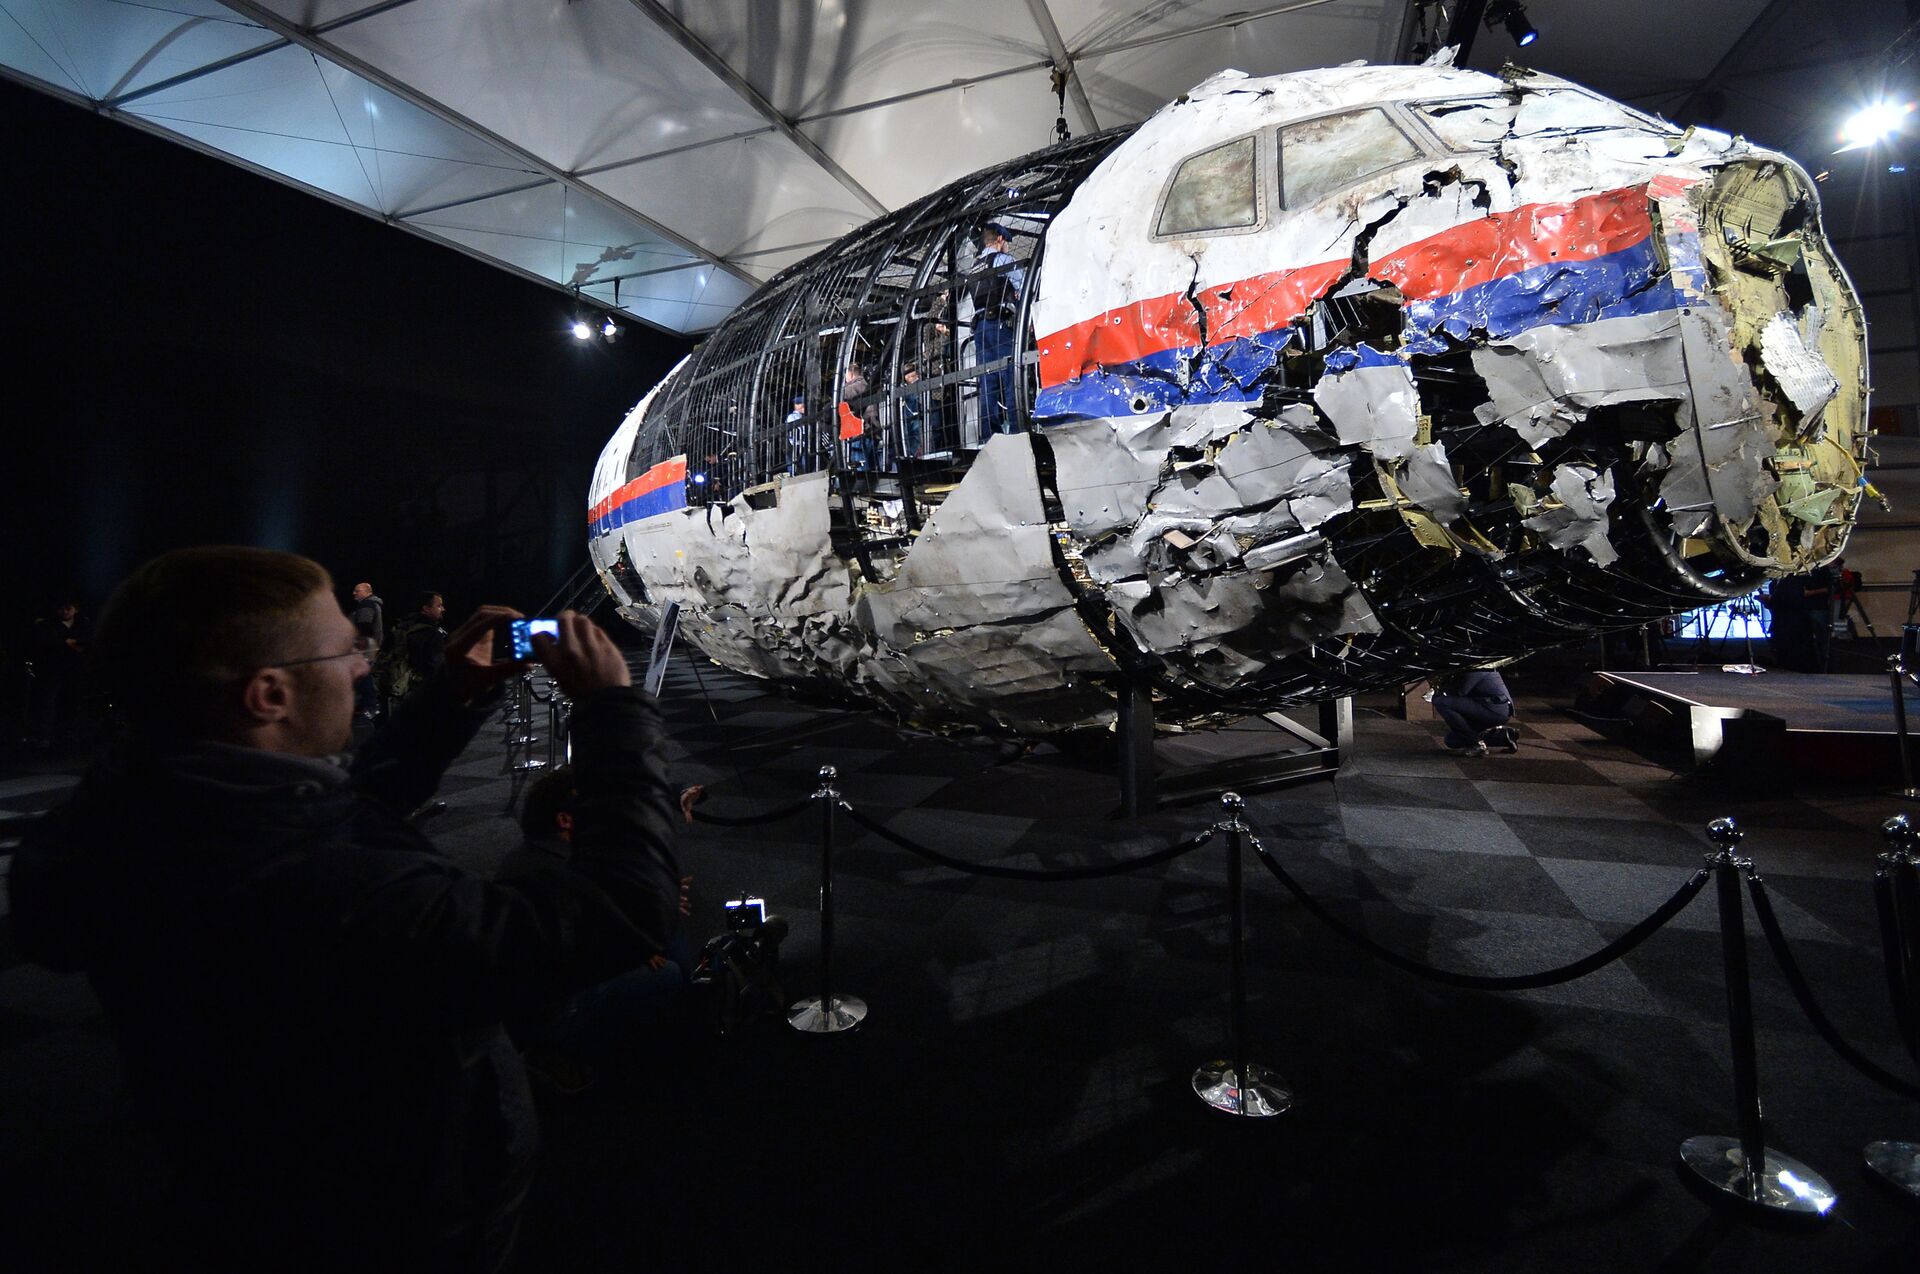 Dutch Safety Board releases report on Malaysia Airlines Flight MH17 crash - Sputnik International, 1920, 02.11.2021